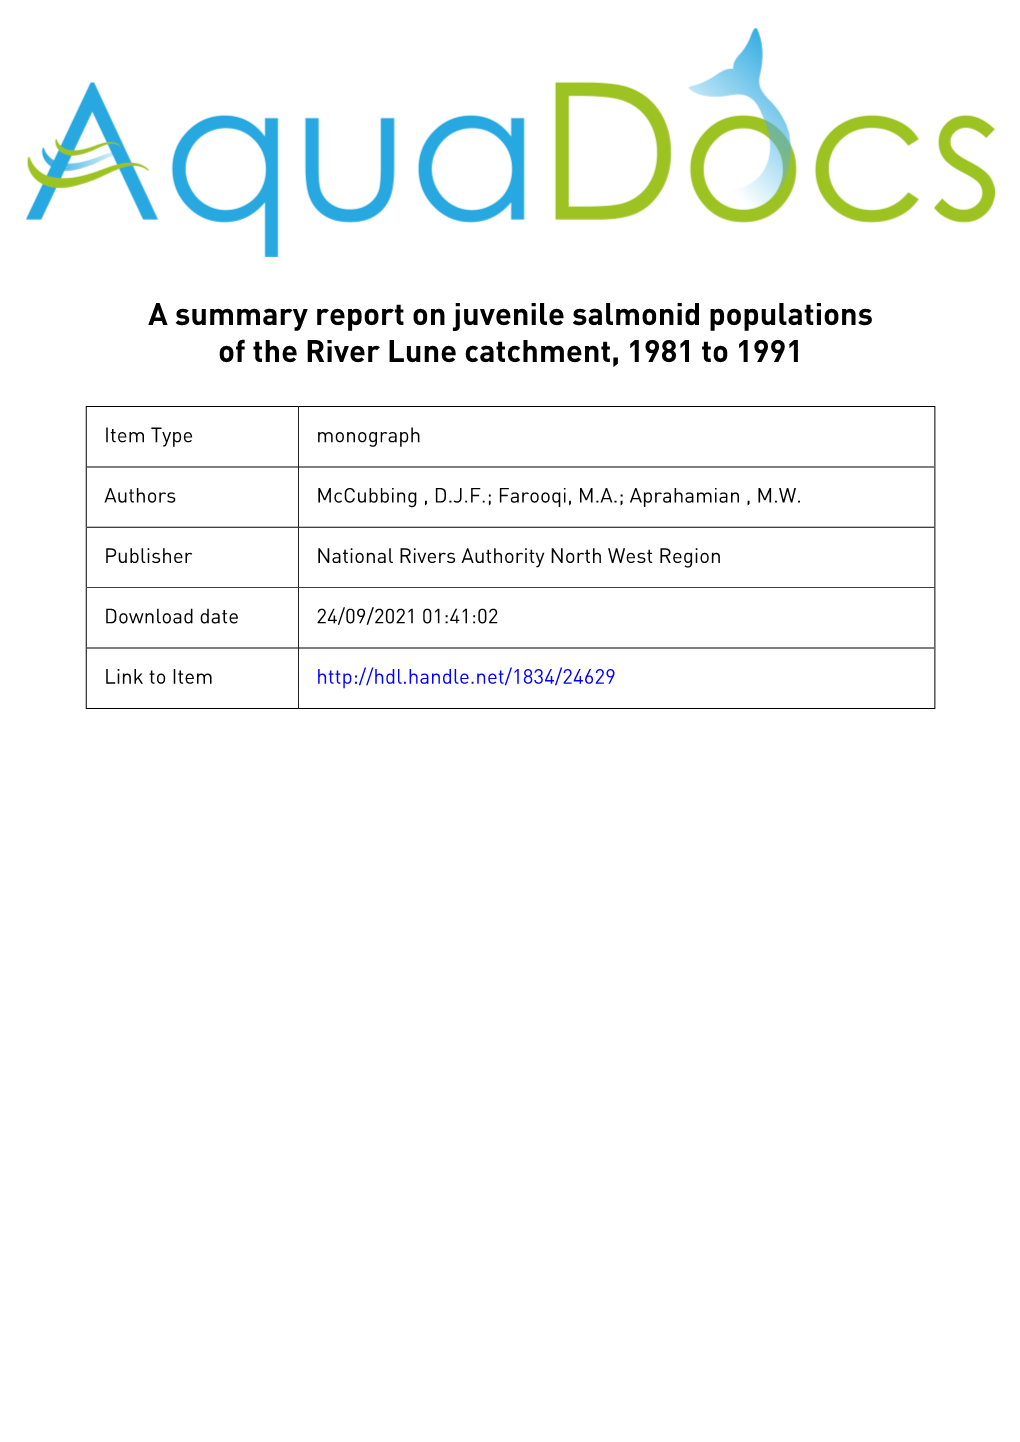 A Summary Report on Juvenile Salmonid Populations in the River Lune Catchment, 1981 to 1991